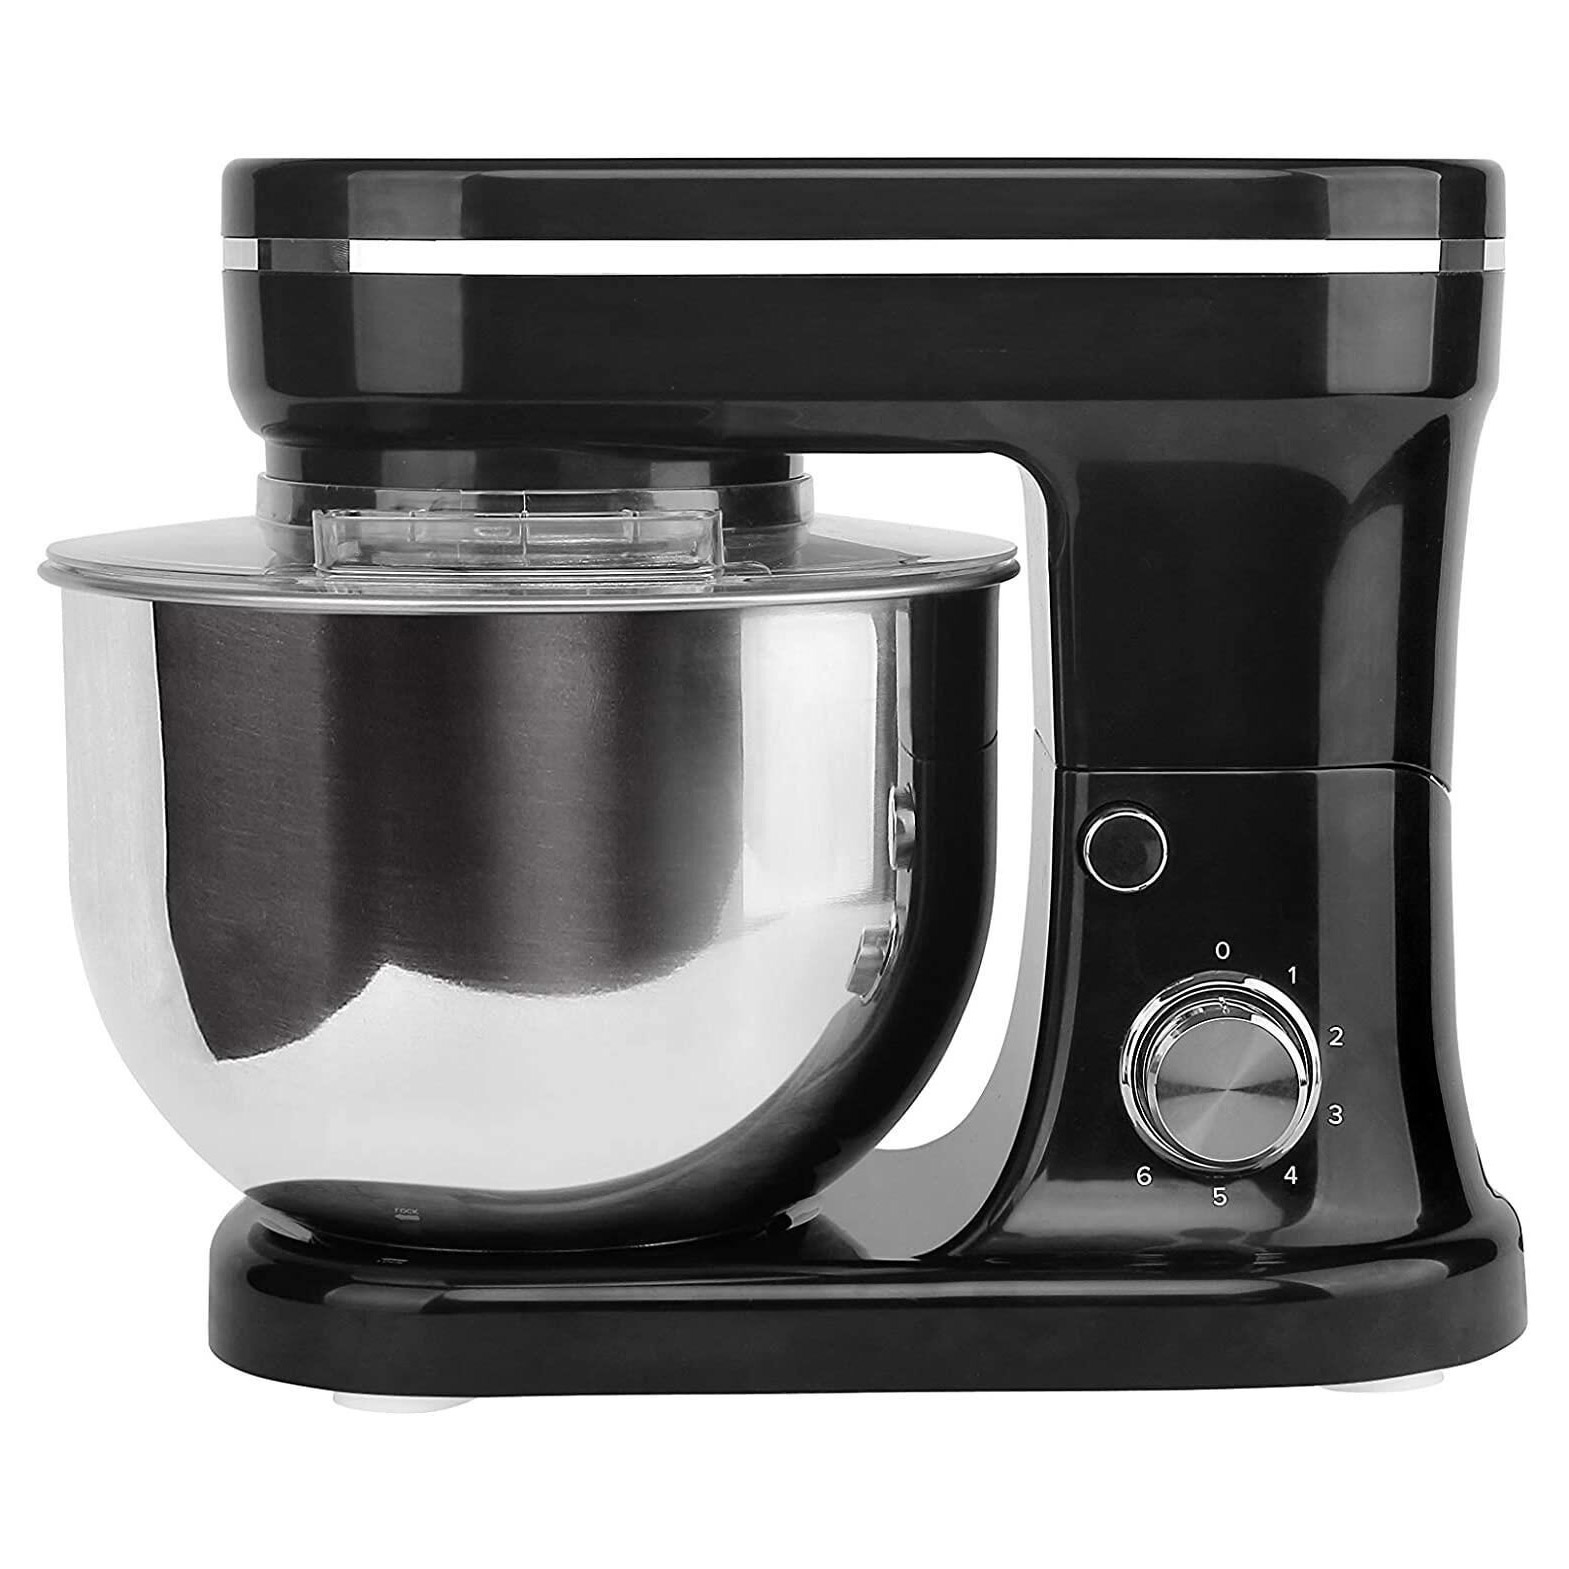 Image of Daewoo SDA1757GE Stand Mixer in Black 1200W 5 Litre Capacity